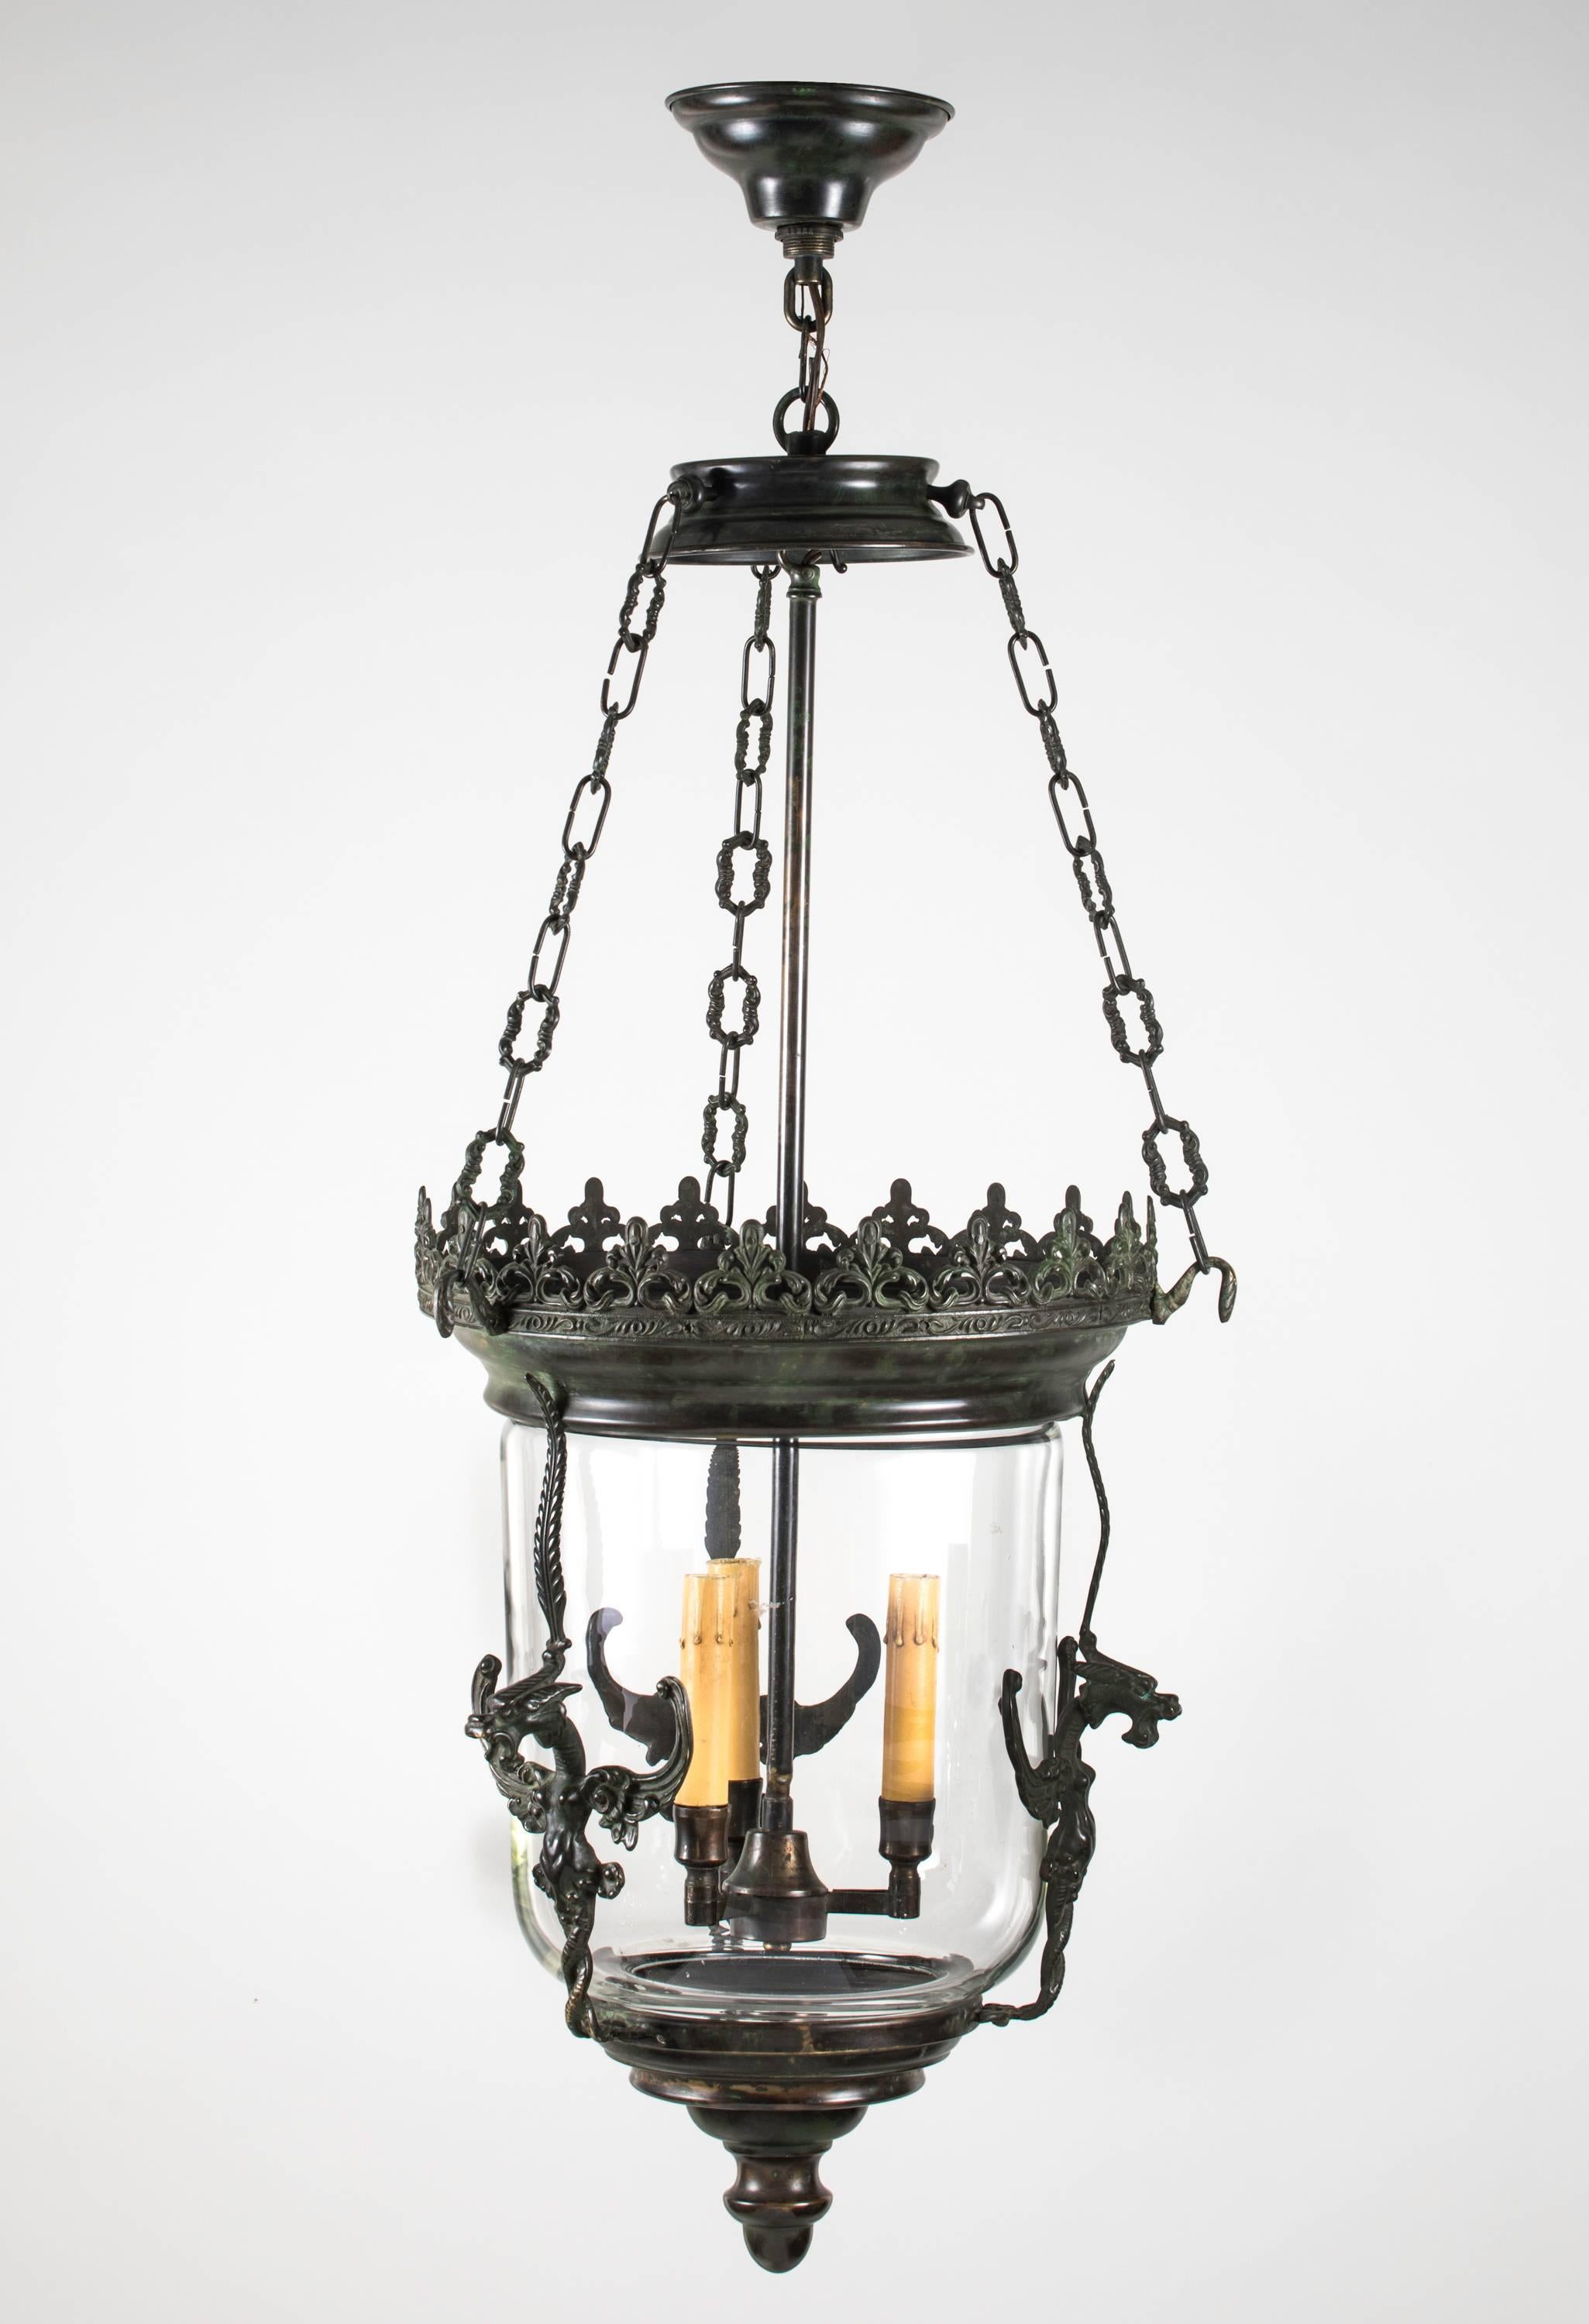 Decorative three-light glass lantern is surrounded in cast bronze frame flanked with three griffins. Beautiful crown work finishes the top. Lantern itself is 15 x 20. Great for entry or hallway lighting.